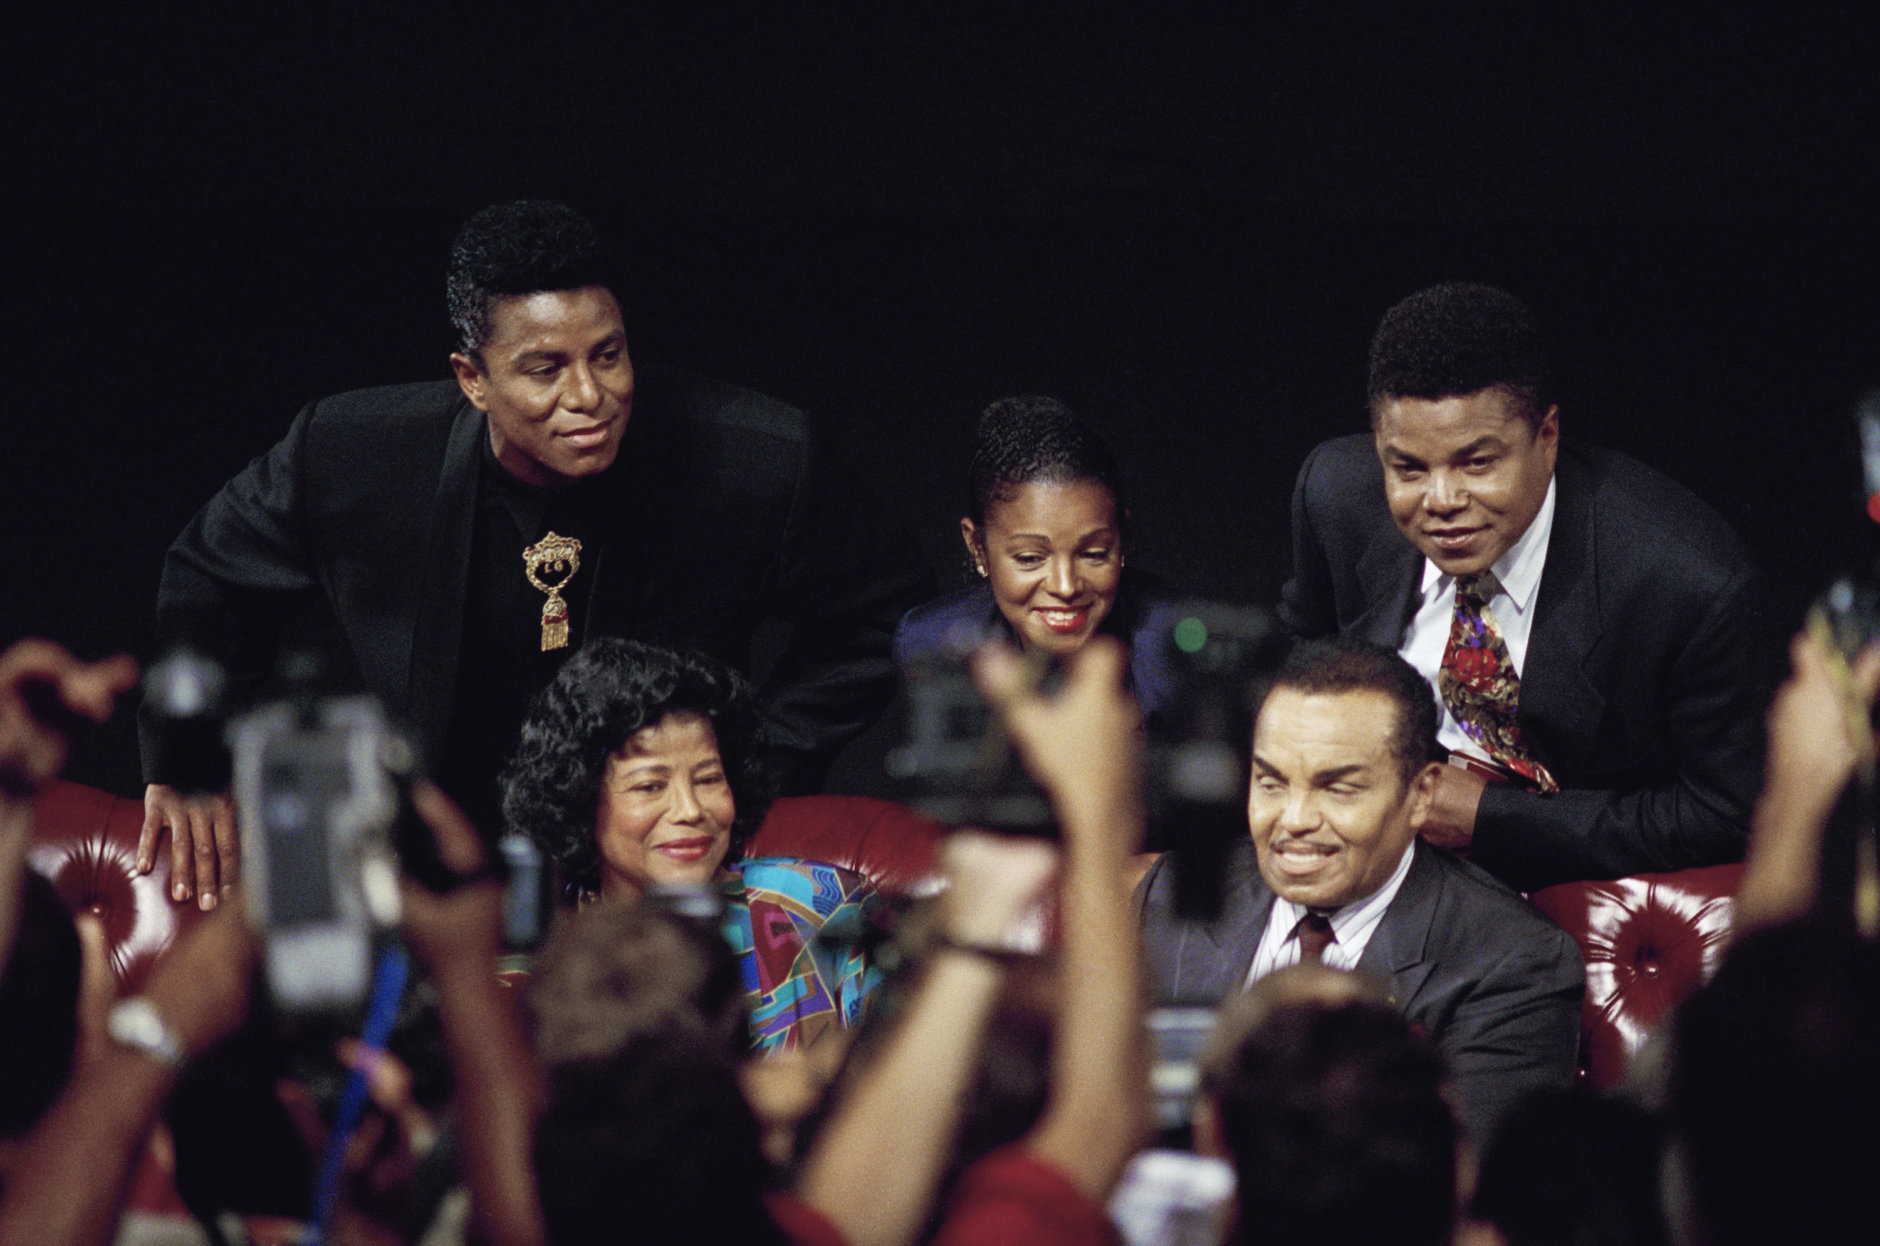 Member of the Jackson family pose for photographers after a press conference Monday, August 30, 1993 in Los Angeles to promote a benefit concert involving the family. From left are Brother Jermaine Jackson, mother Katherine, sister Rebbie, husband Joe and Brother Tito. The family defended pop star Michael Jackson who is under investigation following child molestation allegations. (AP Photo/ Eric Draper)